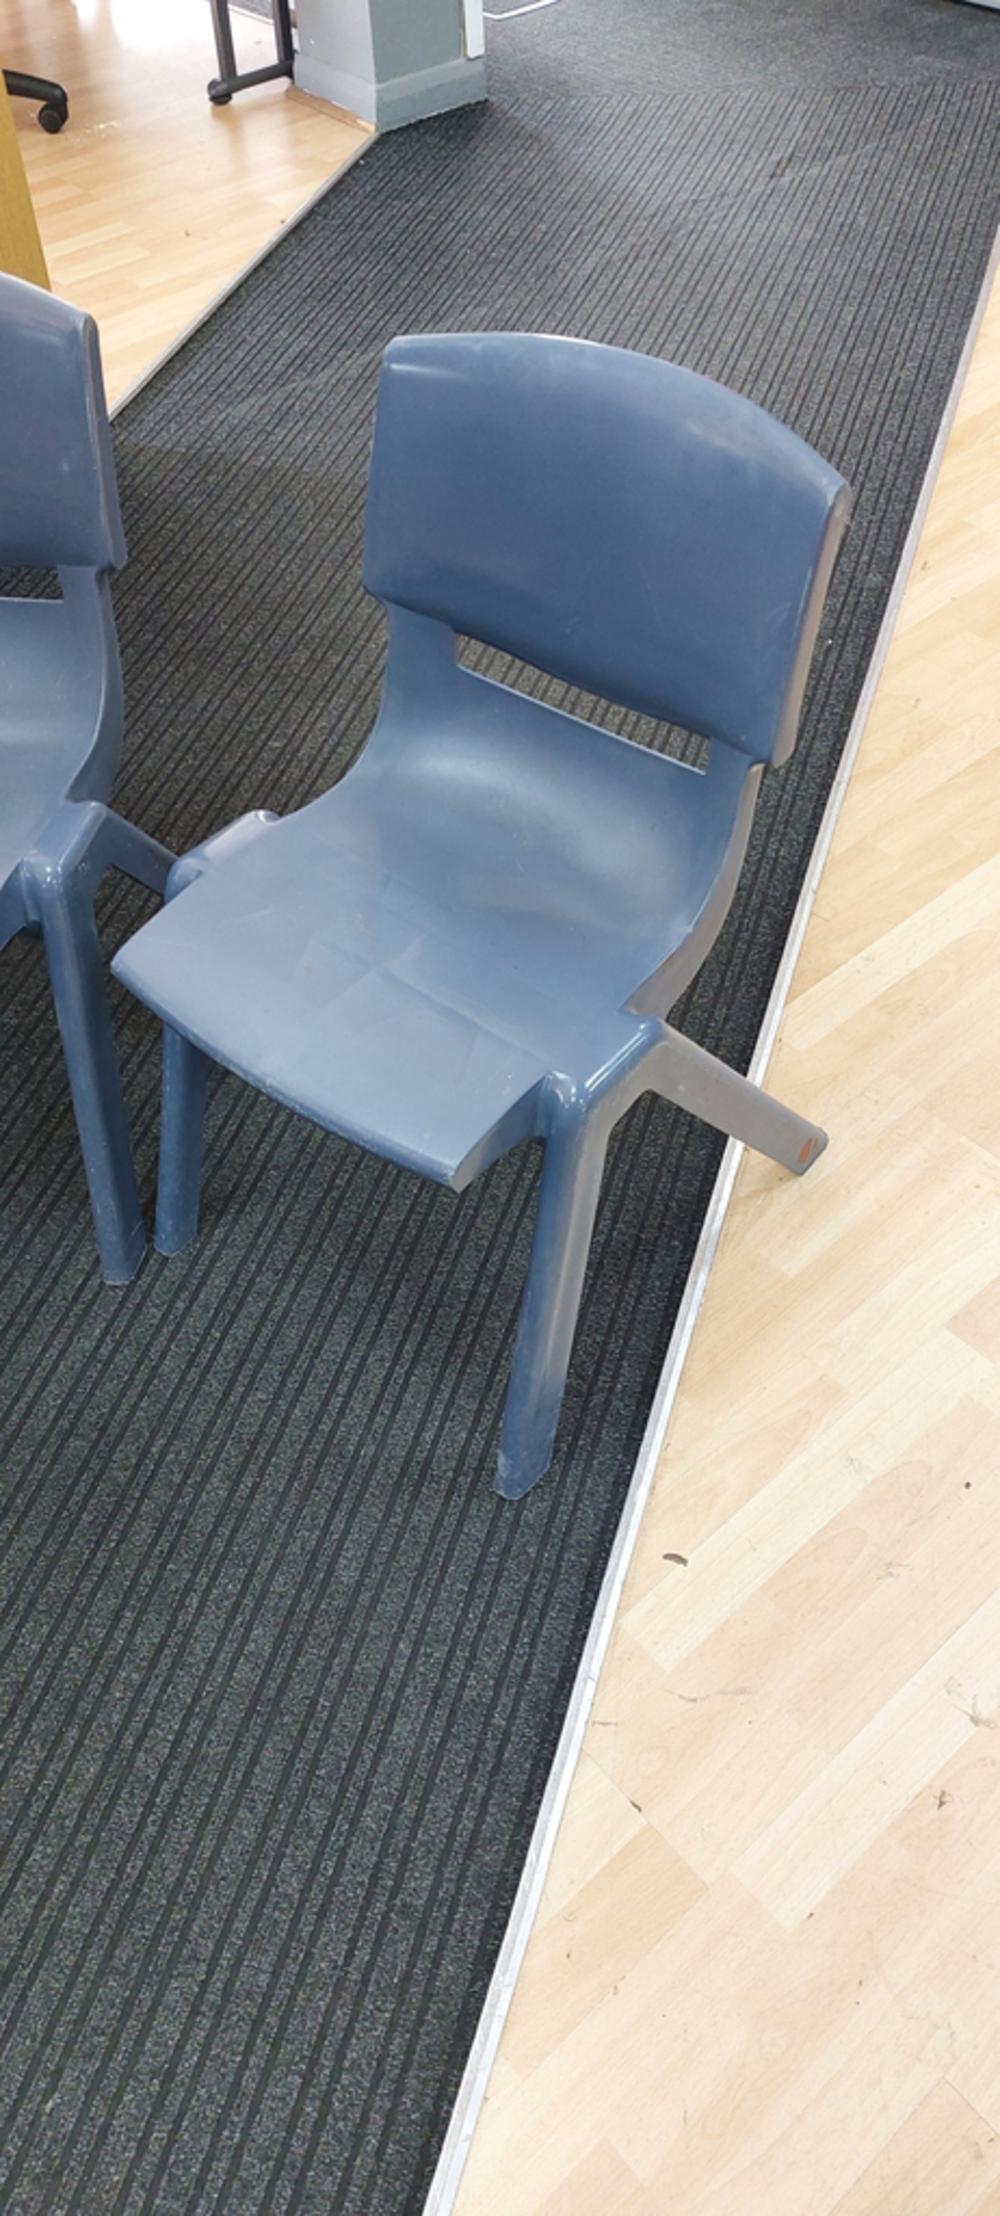 Set Of 2 Grey Plastic Stacking Chairs 